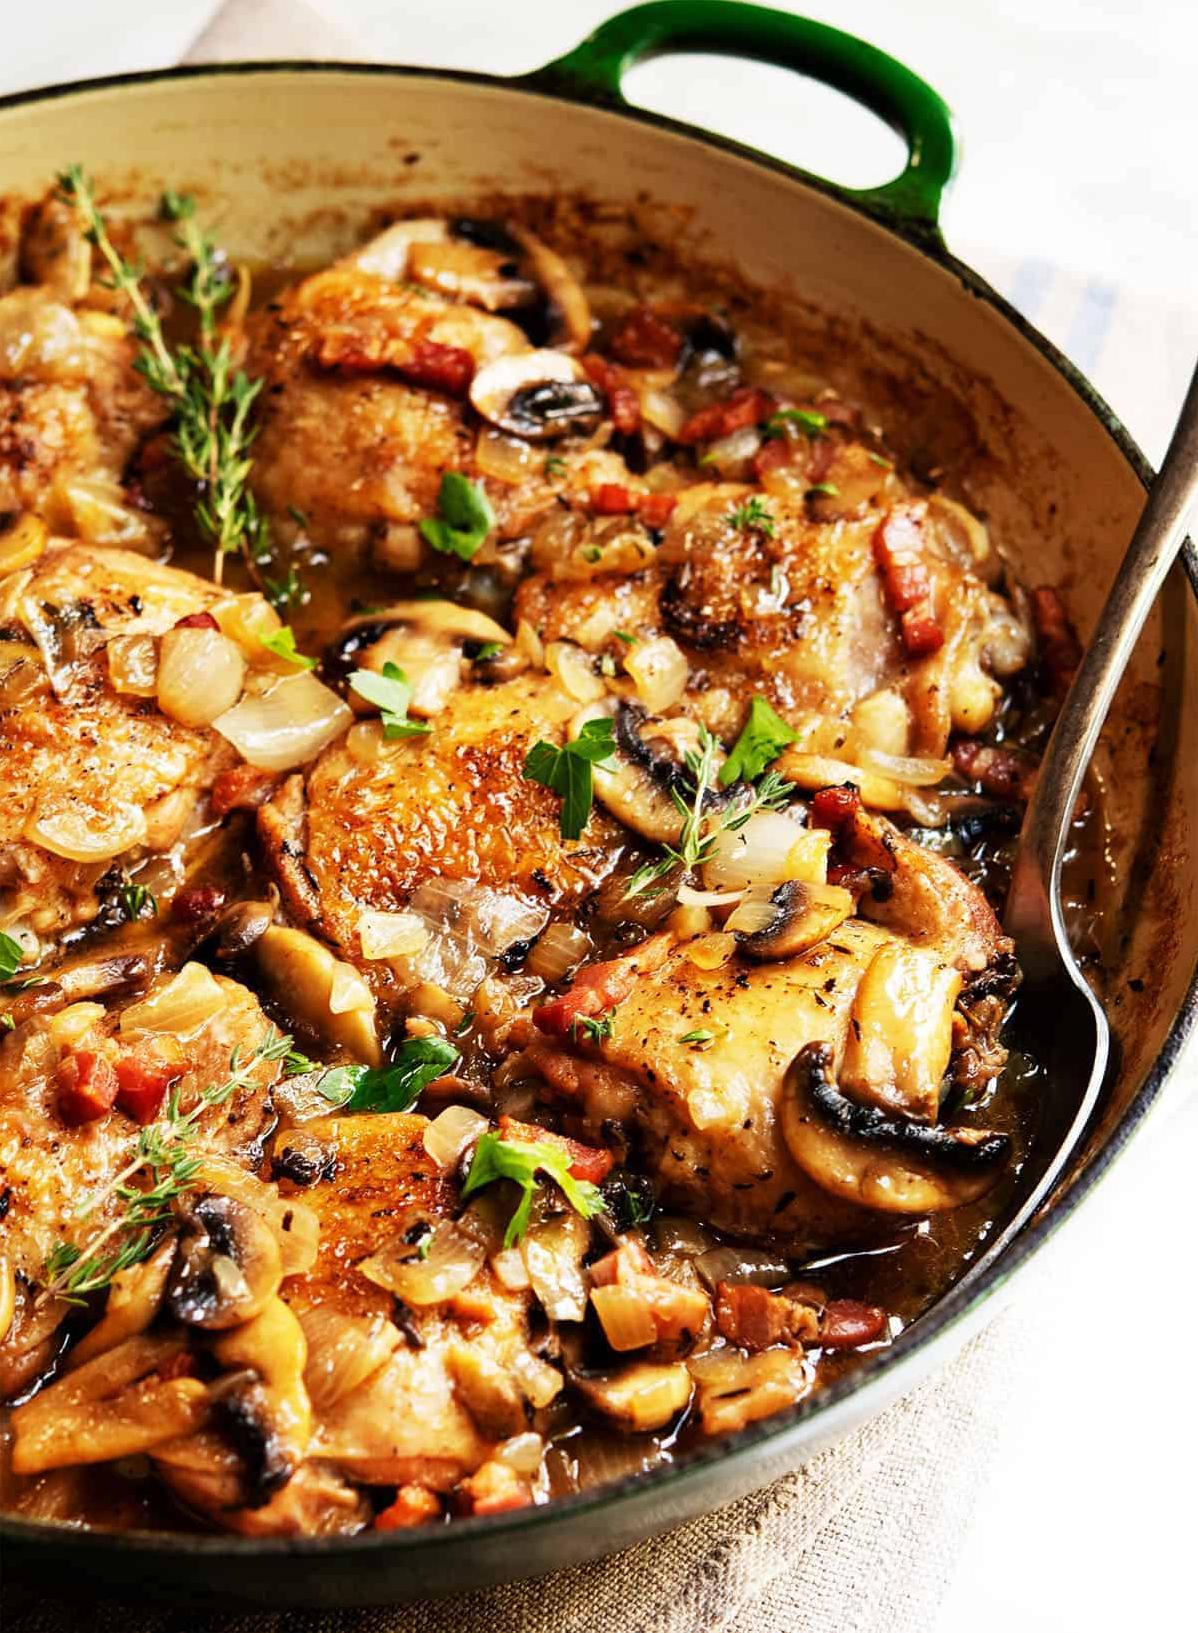  Coq Au Vin Blanc represents an elegant French classic made easy to prepare at home.